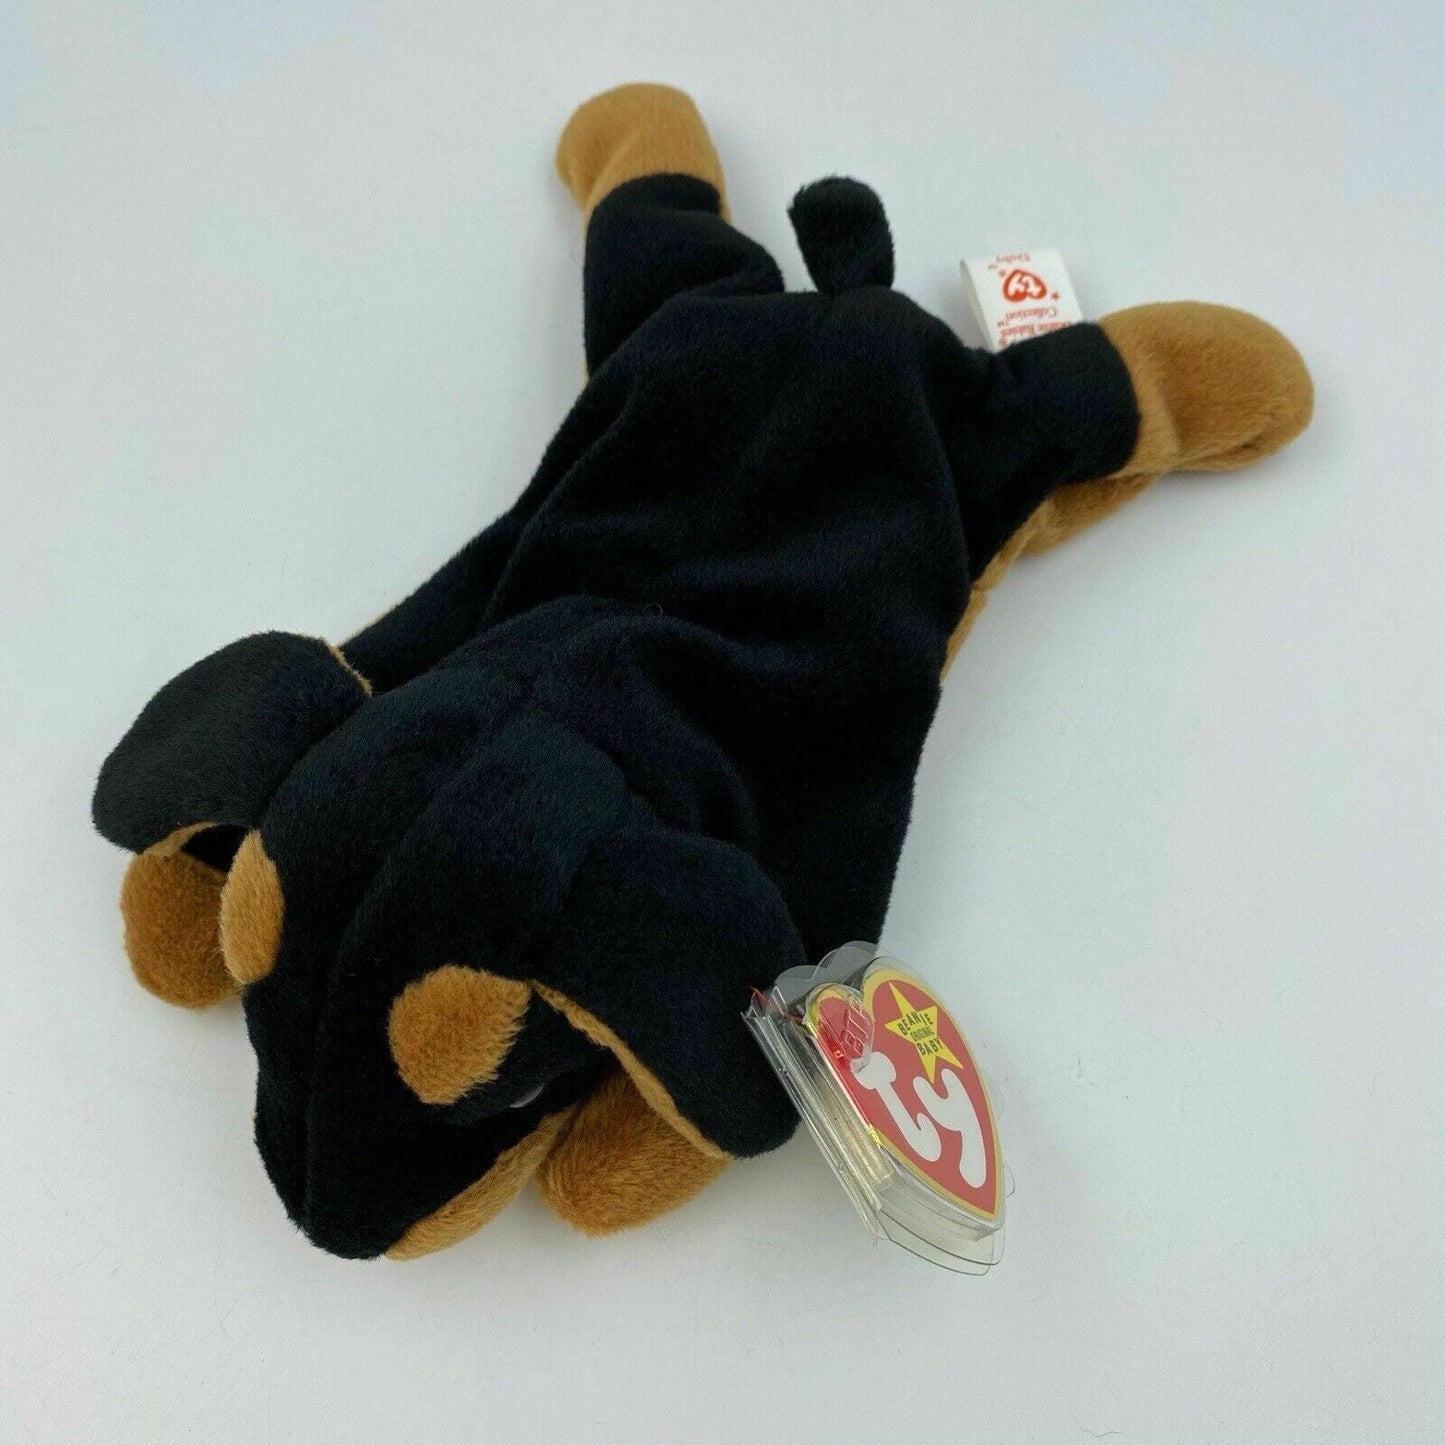 Ty Original Beanie Babies Doby The Doberman Dog Excellent Cond. w/ Errors 4110